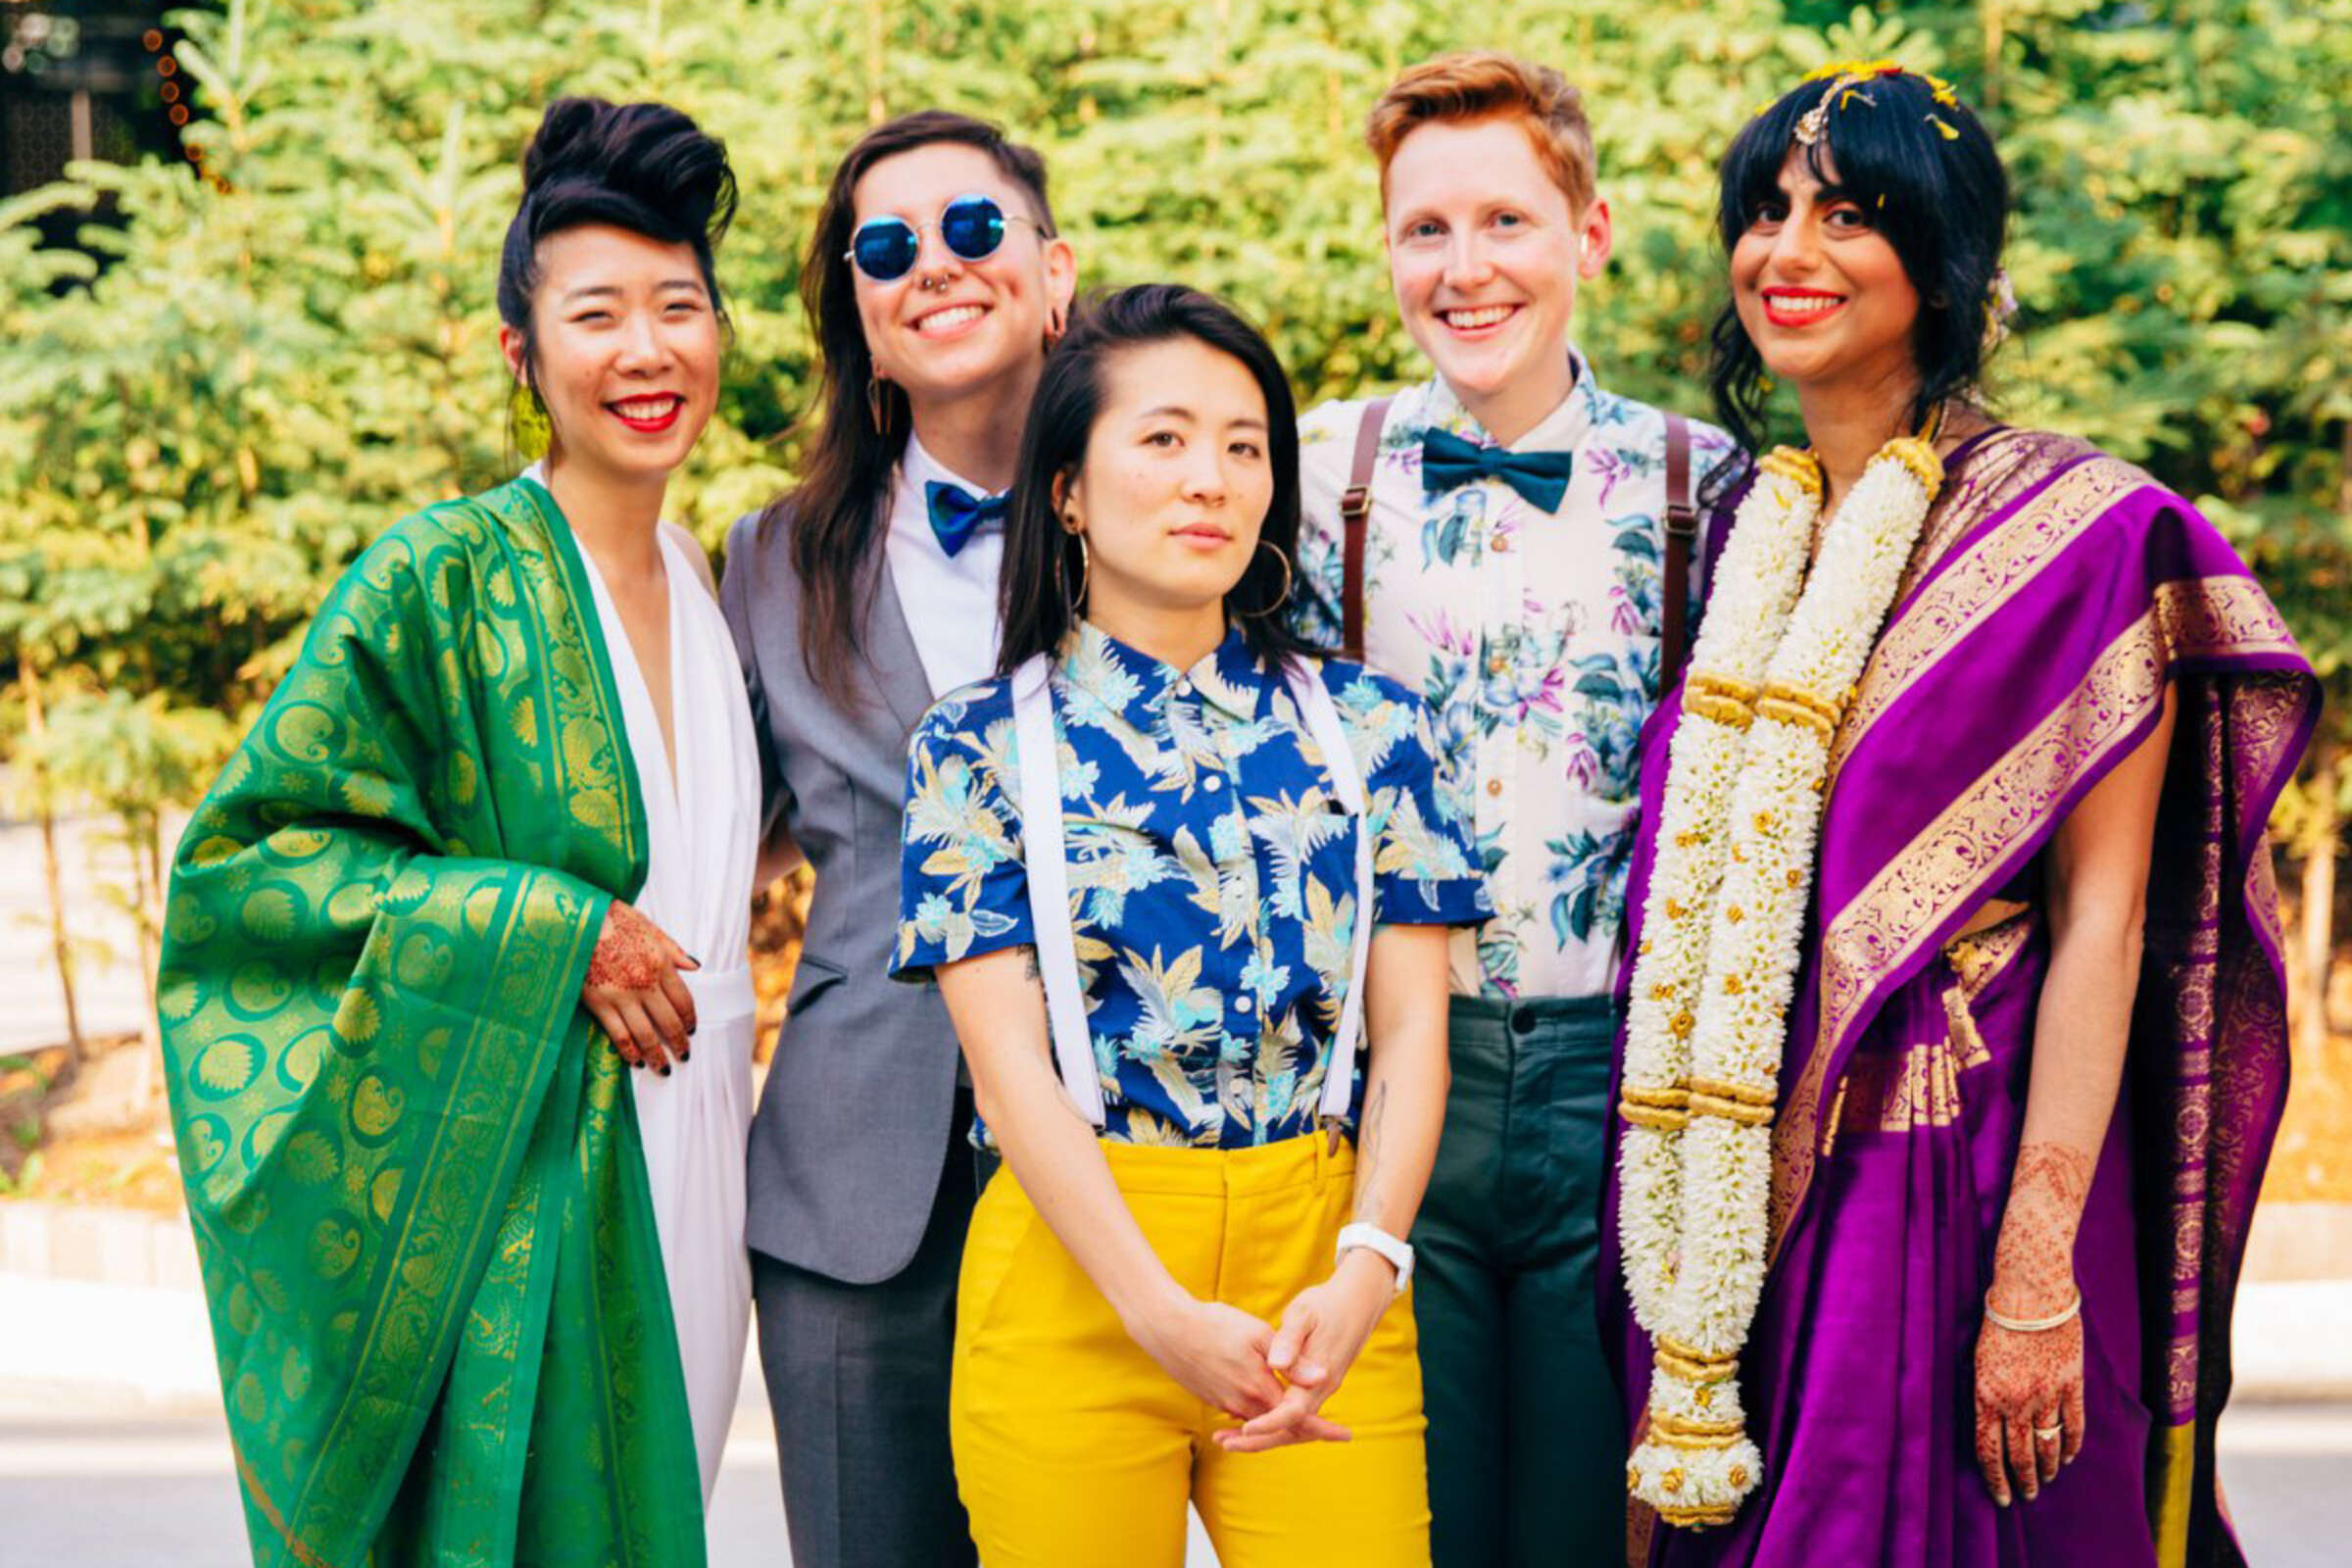 Five people pose together outdoors, smiling at the camera. They are dressed in a variety of colorful, eclectic outfits, including a green robe, a floral shirt with yellow pants, a purple sari with gold trim, and a suit with a bow tie. Trees are visible in the background.